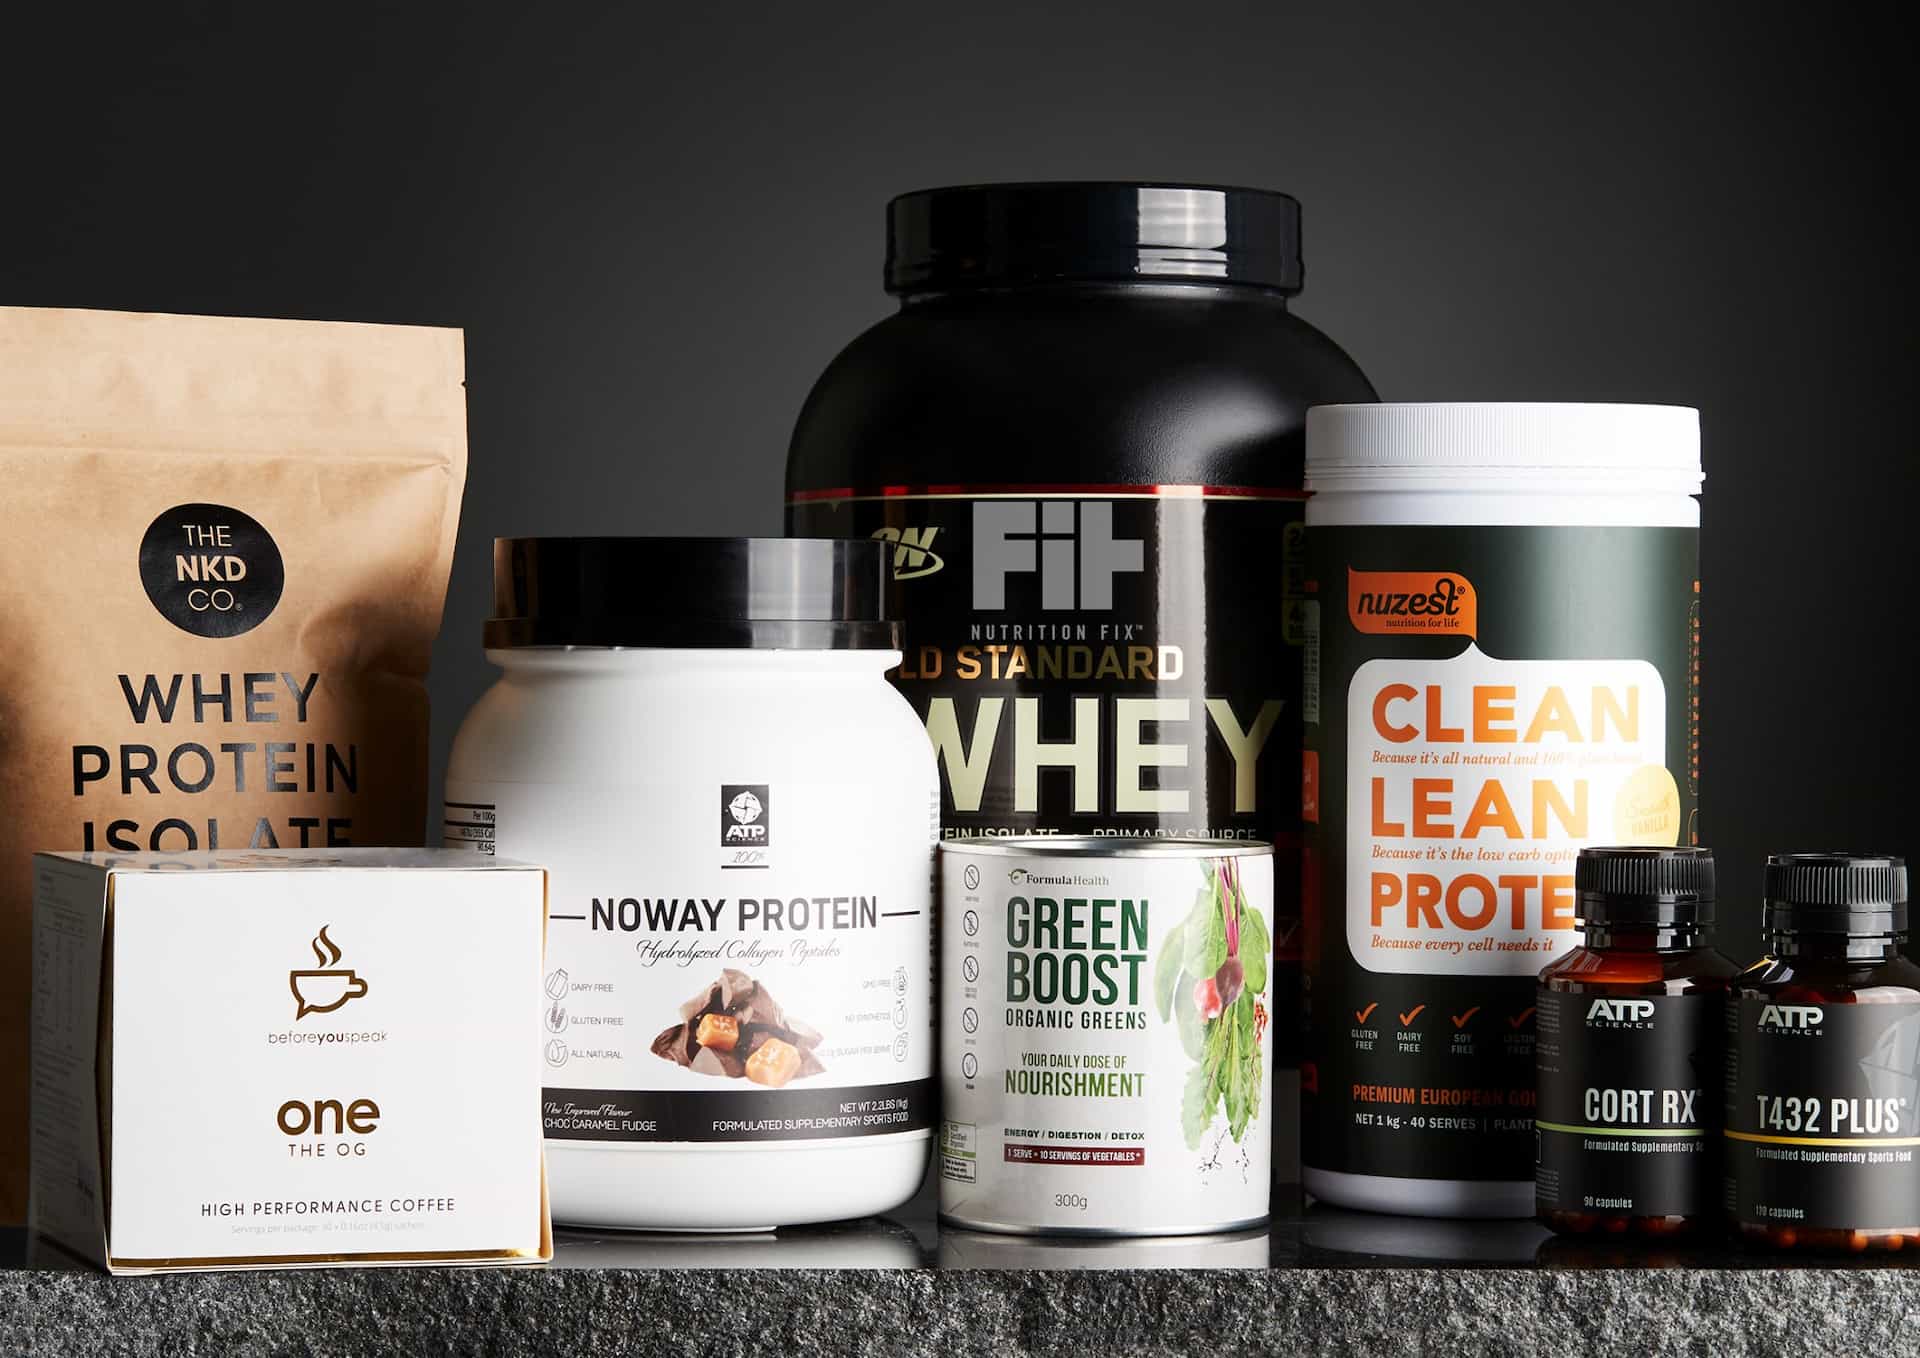 10% OFF your first order when you sign up at Fit Nutrition